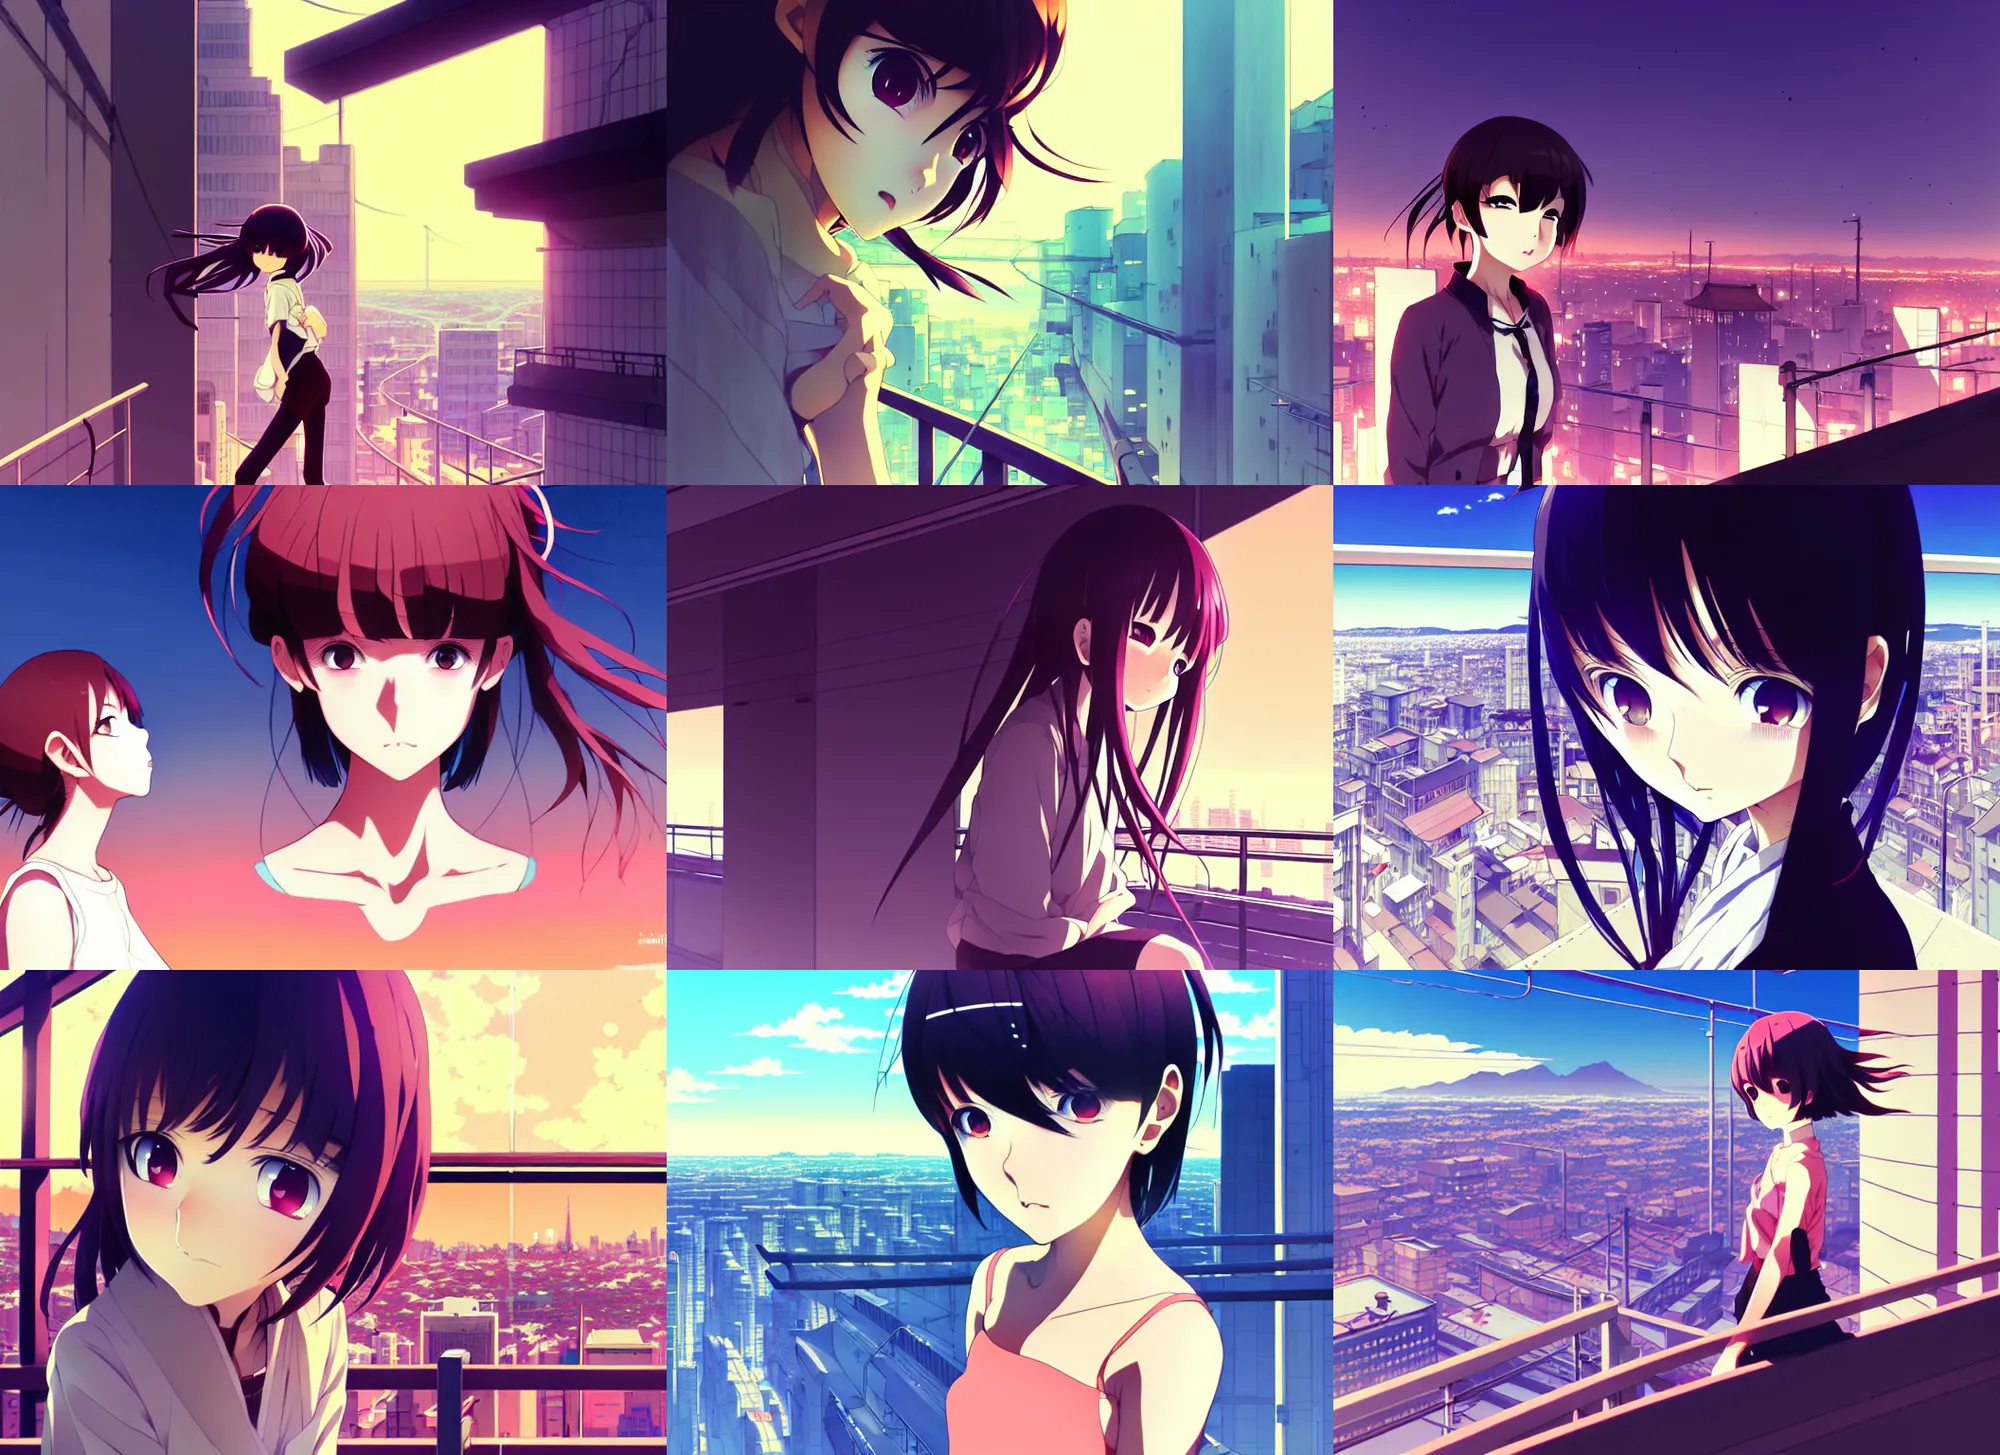 Prompt: anime frames, anime visual, portrait of a young female traveler sight seeing above the city exterior, guardrails, very low light, cute face by ilya kuvshinov and yoh yoshinari, katsura masakazu, mucha, dynamic pose, dynamic perspective, strong silhouette, anime cels, rounded eyes, smooth facial features, contrasting shadows